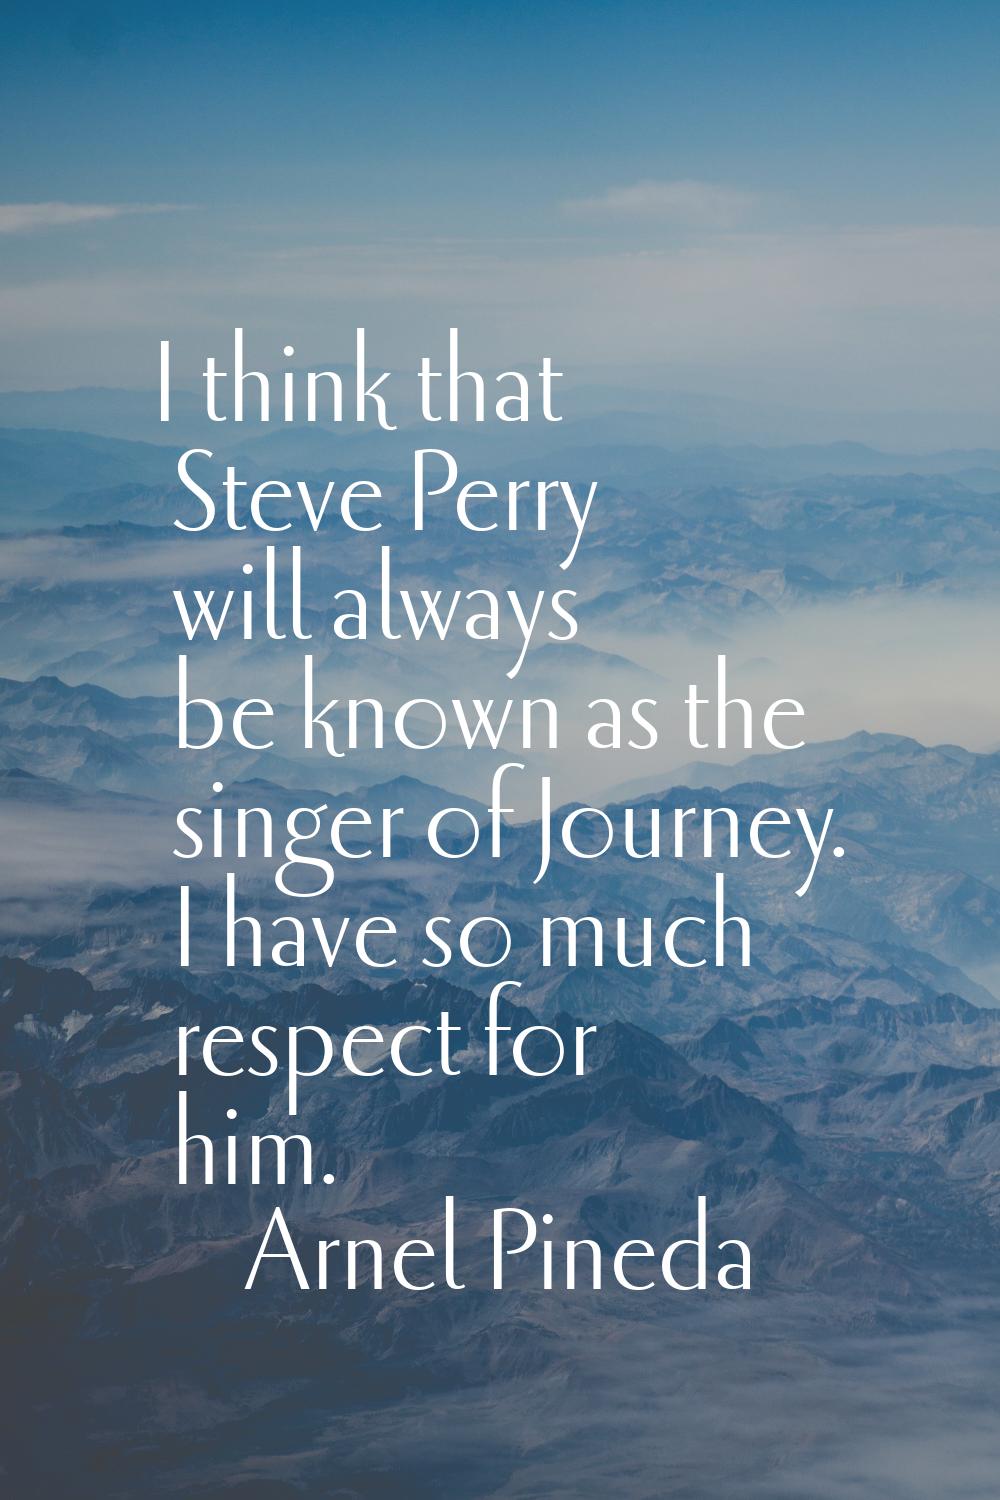 I think that Steve Perry will always be known as the singer of Journey. I have so much respect for 